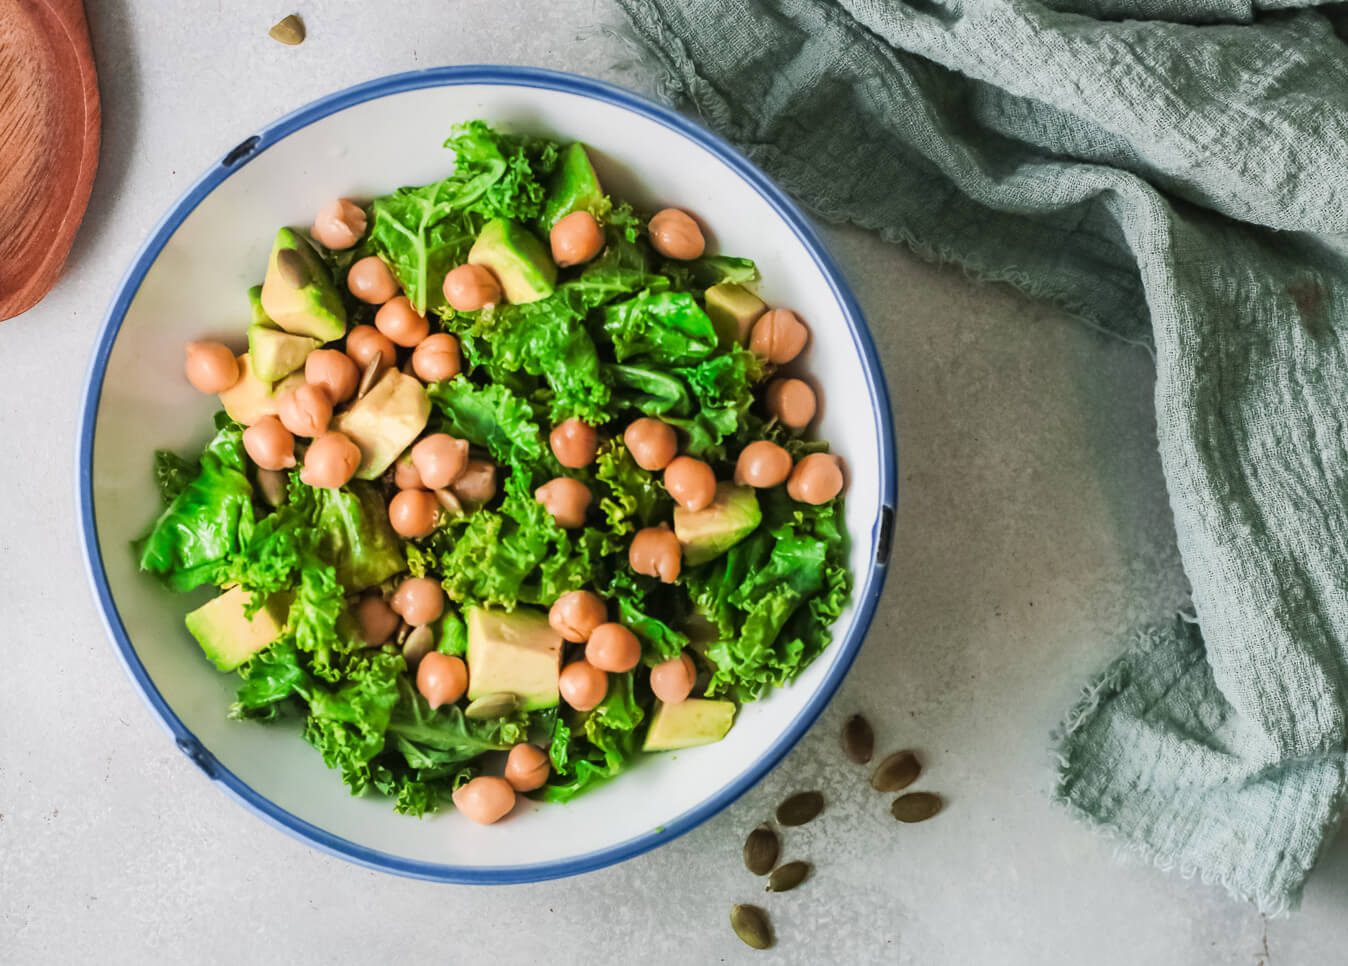 lemony kale and chickpea salad - low potassium and delicious